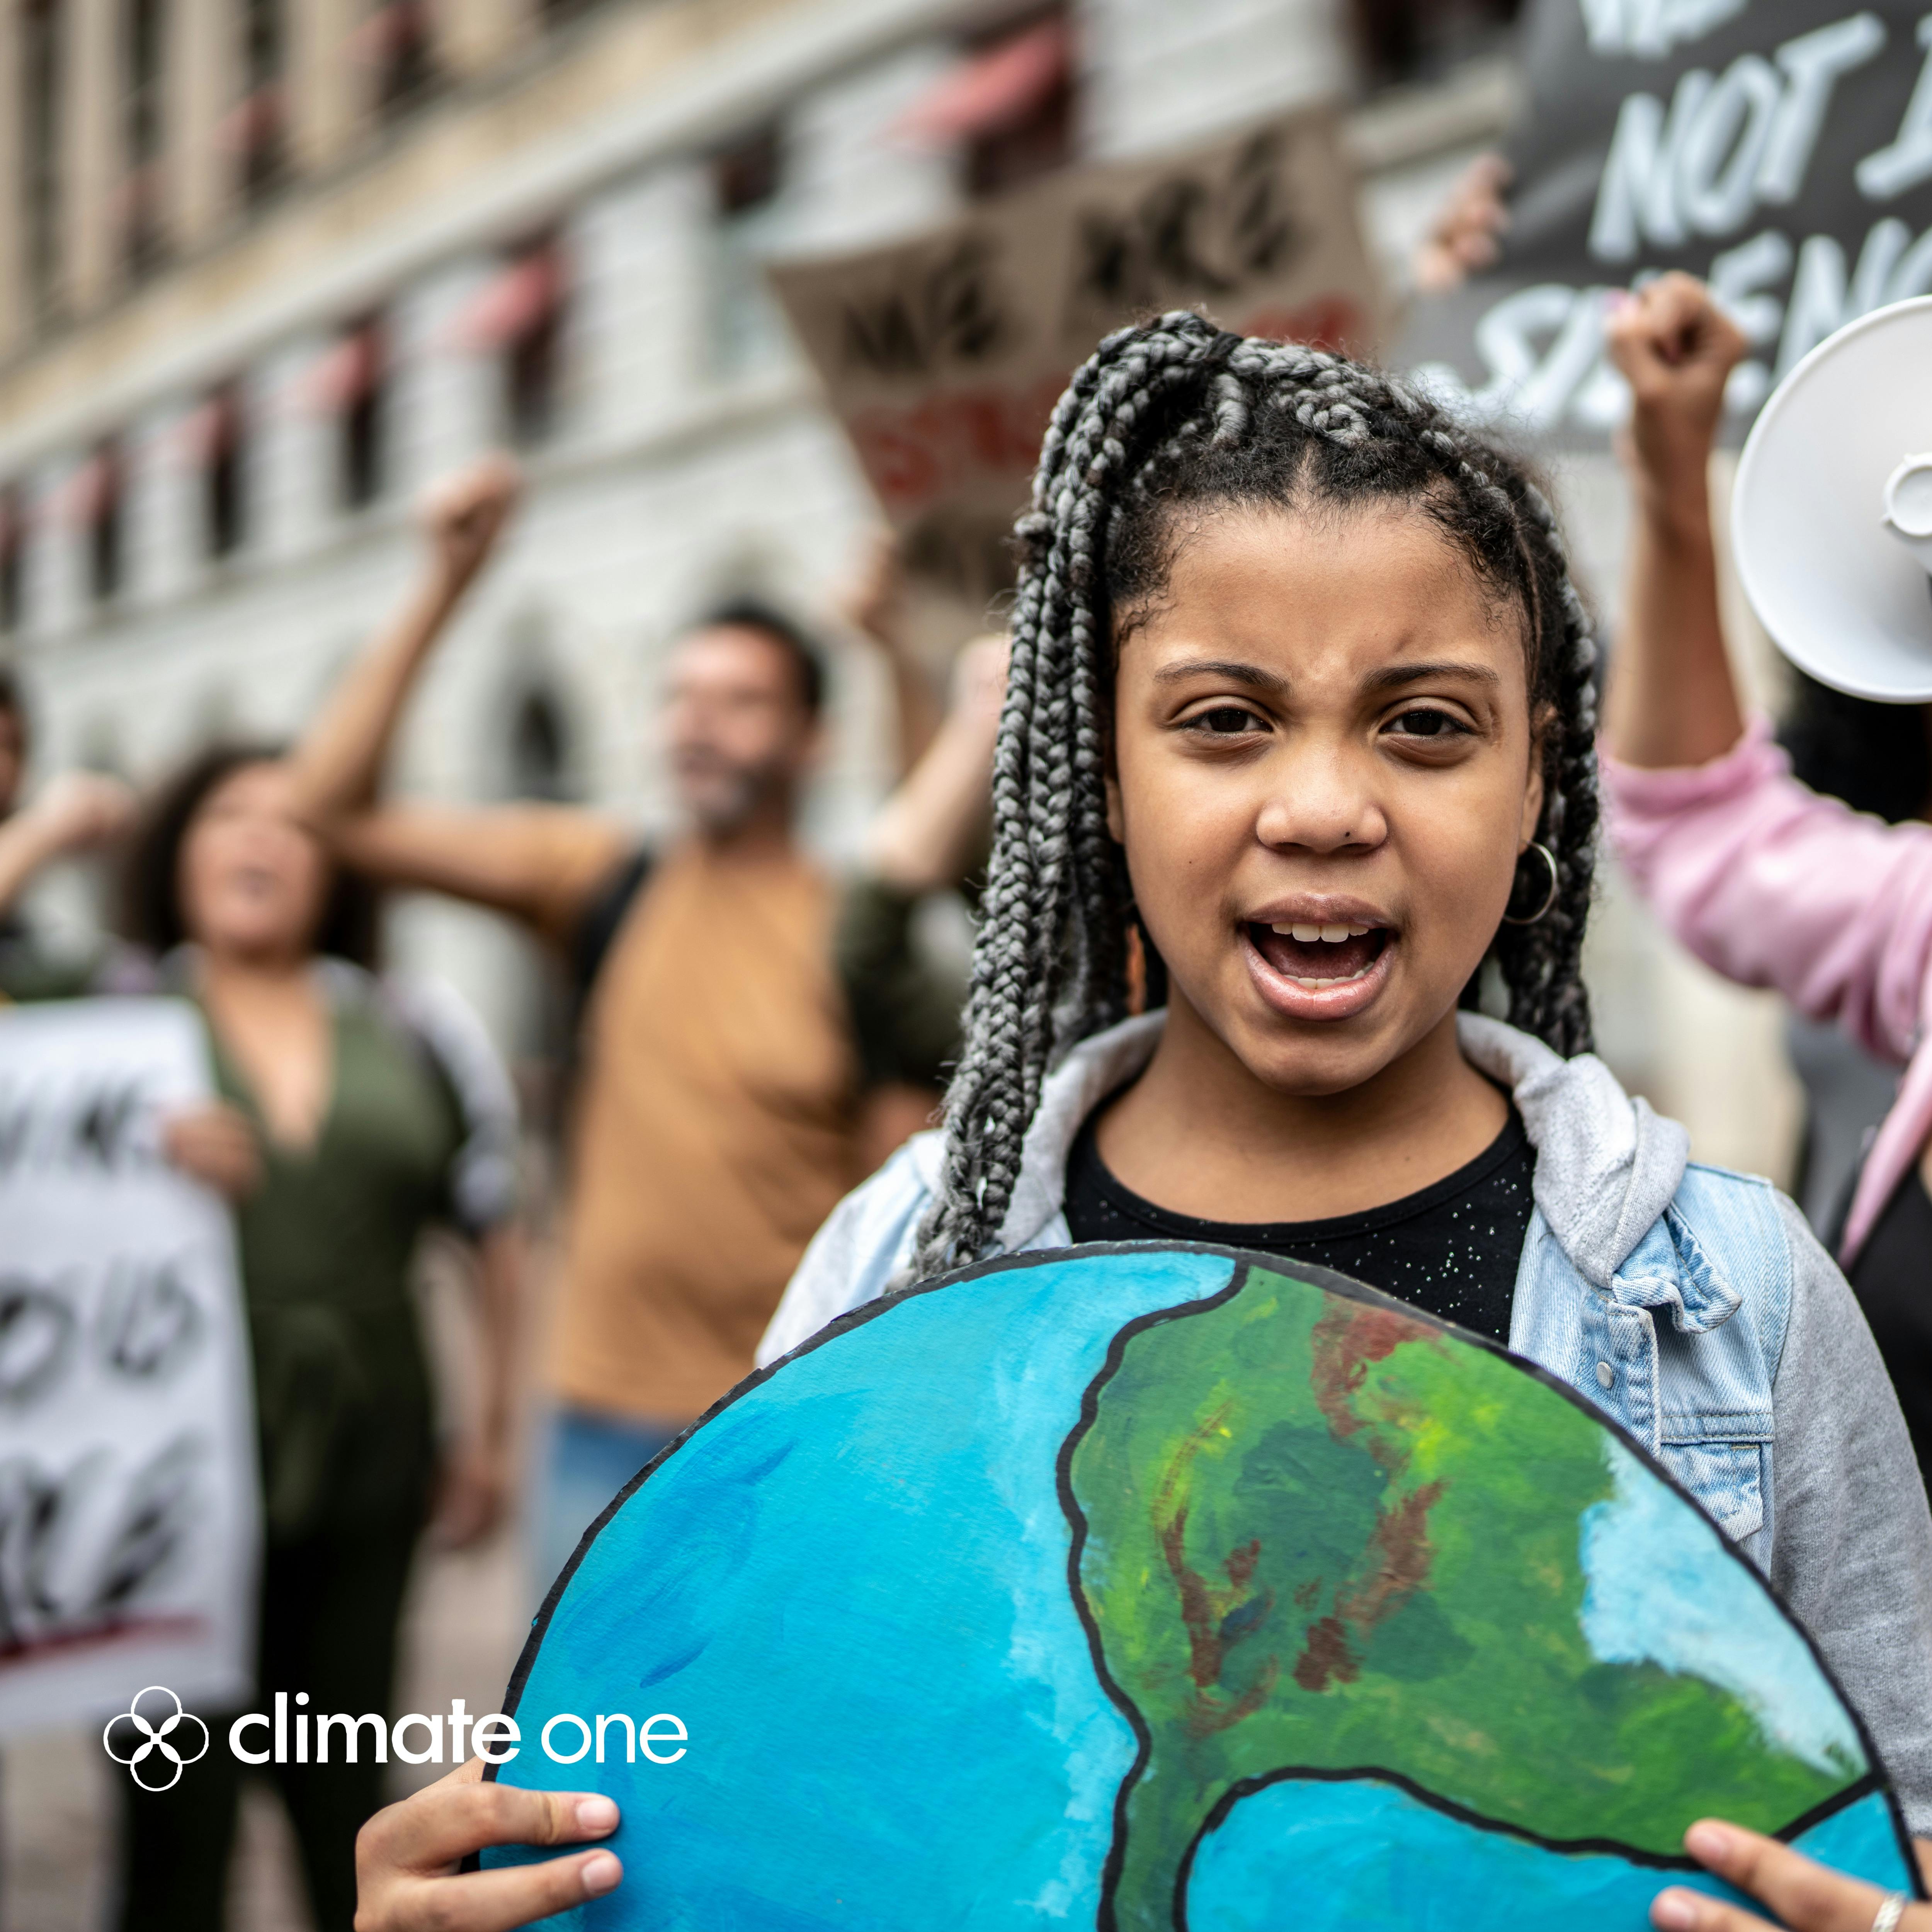 CLIMATE ONE: Youth Activists 15 Years Later